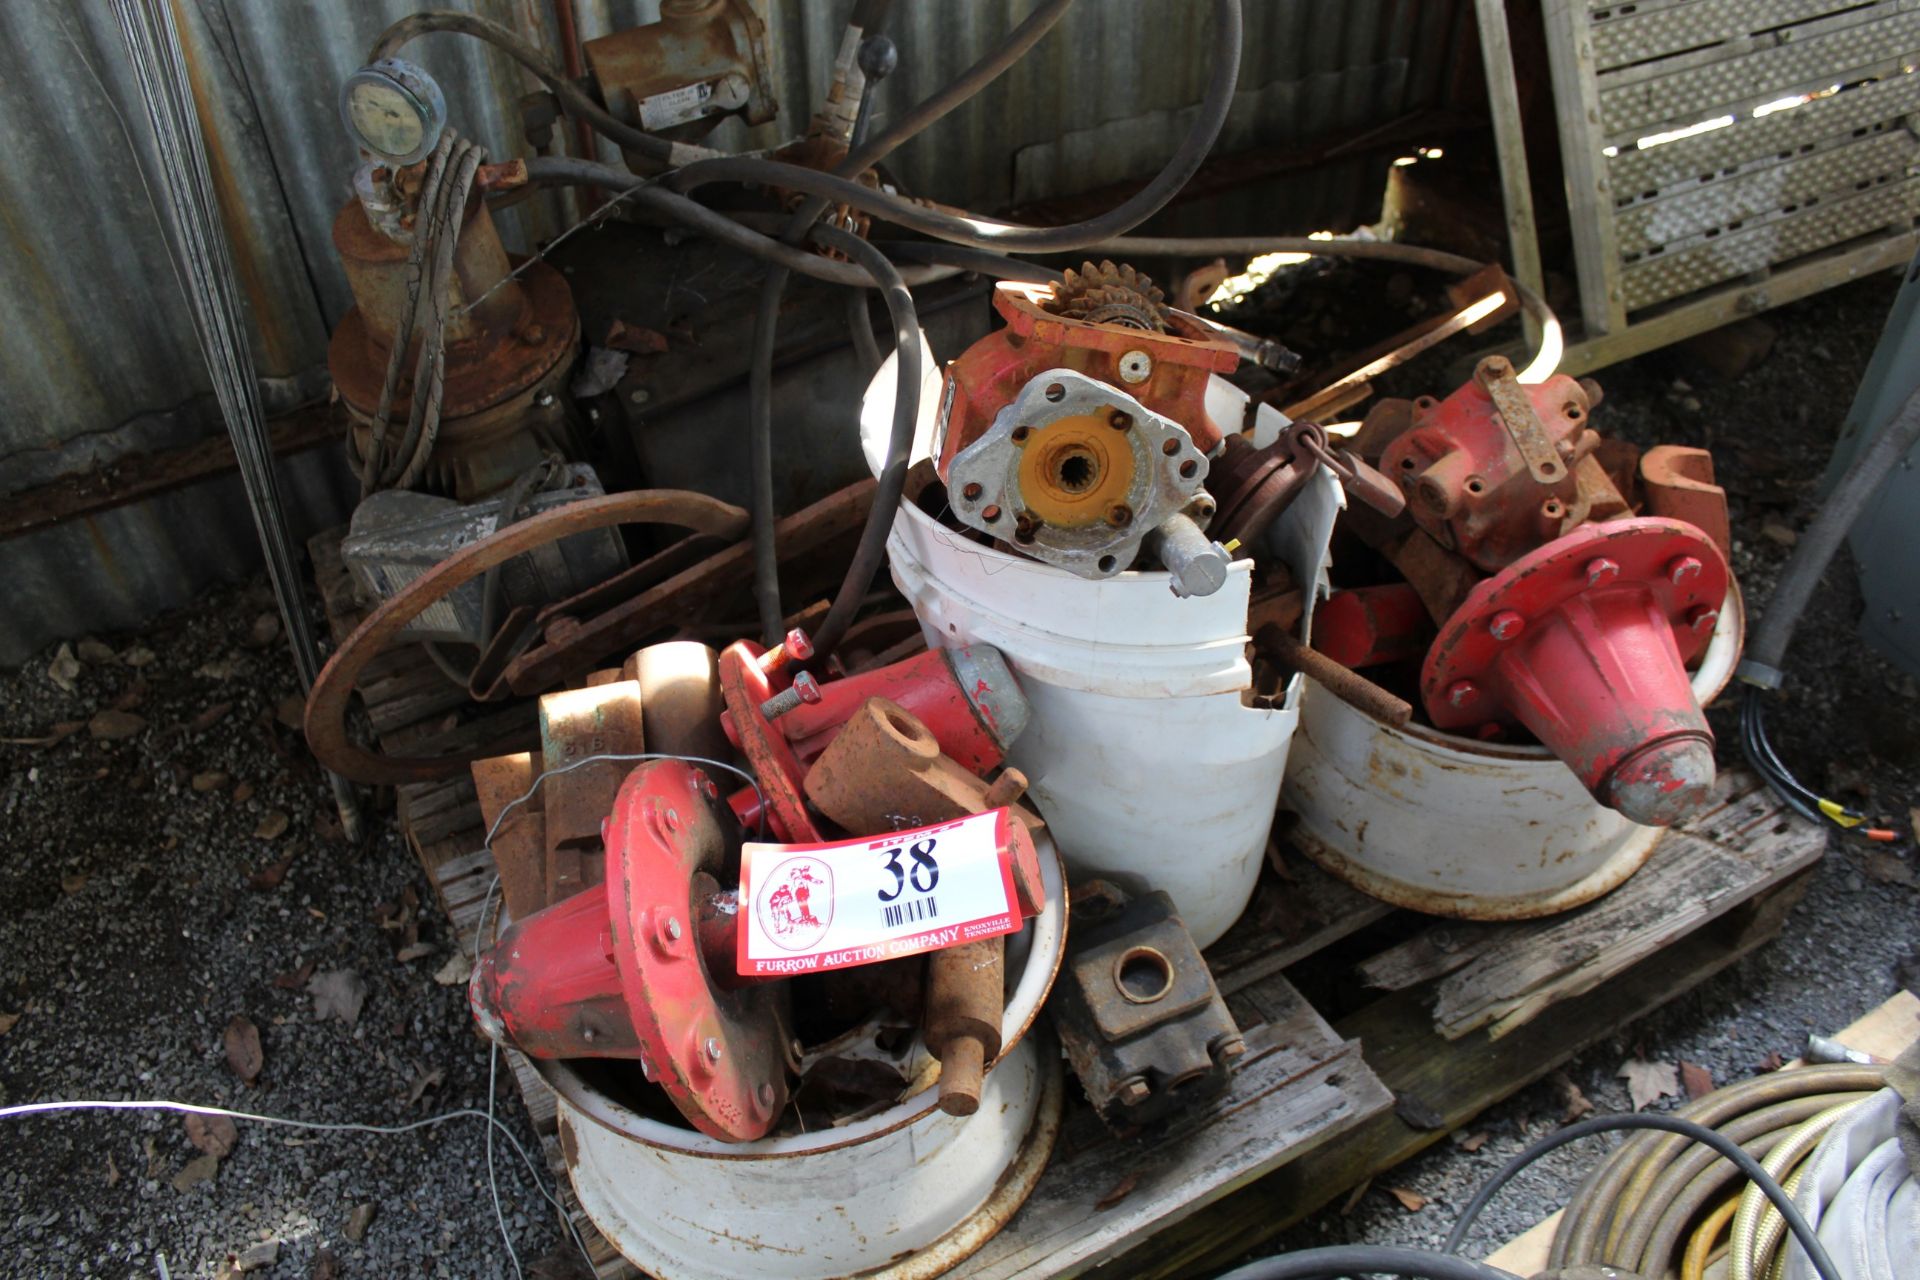 Contents of Pallet, Hydraulic Power Unit, Various Wheel Hubs, Parts & Components